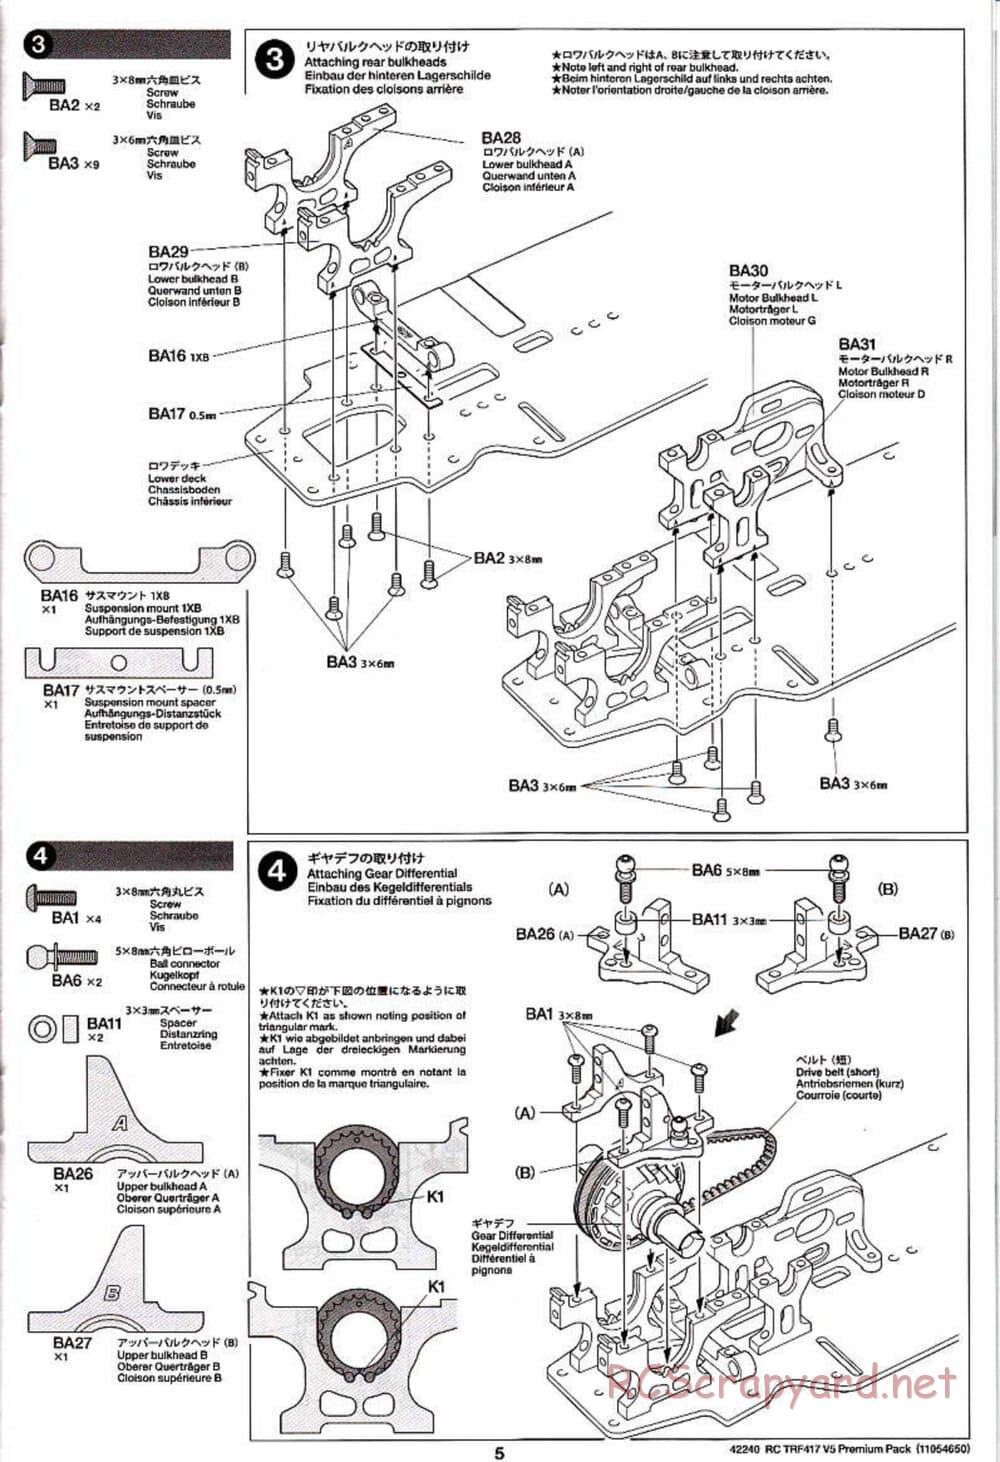 Tamiya - TRF417 V5 Premium Package Chassis - Manual - Page 5